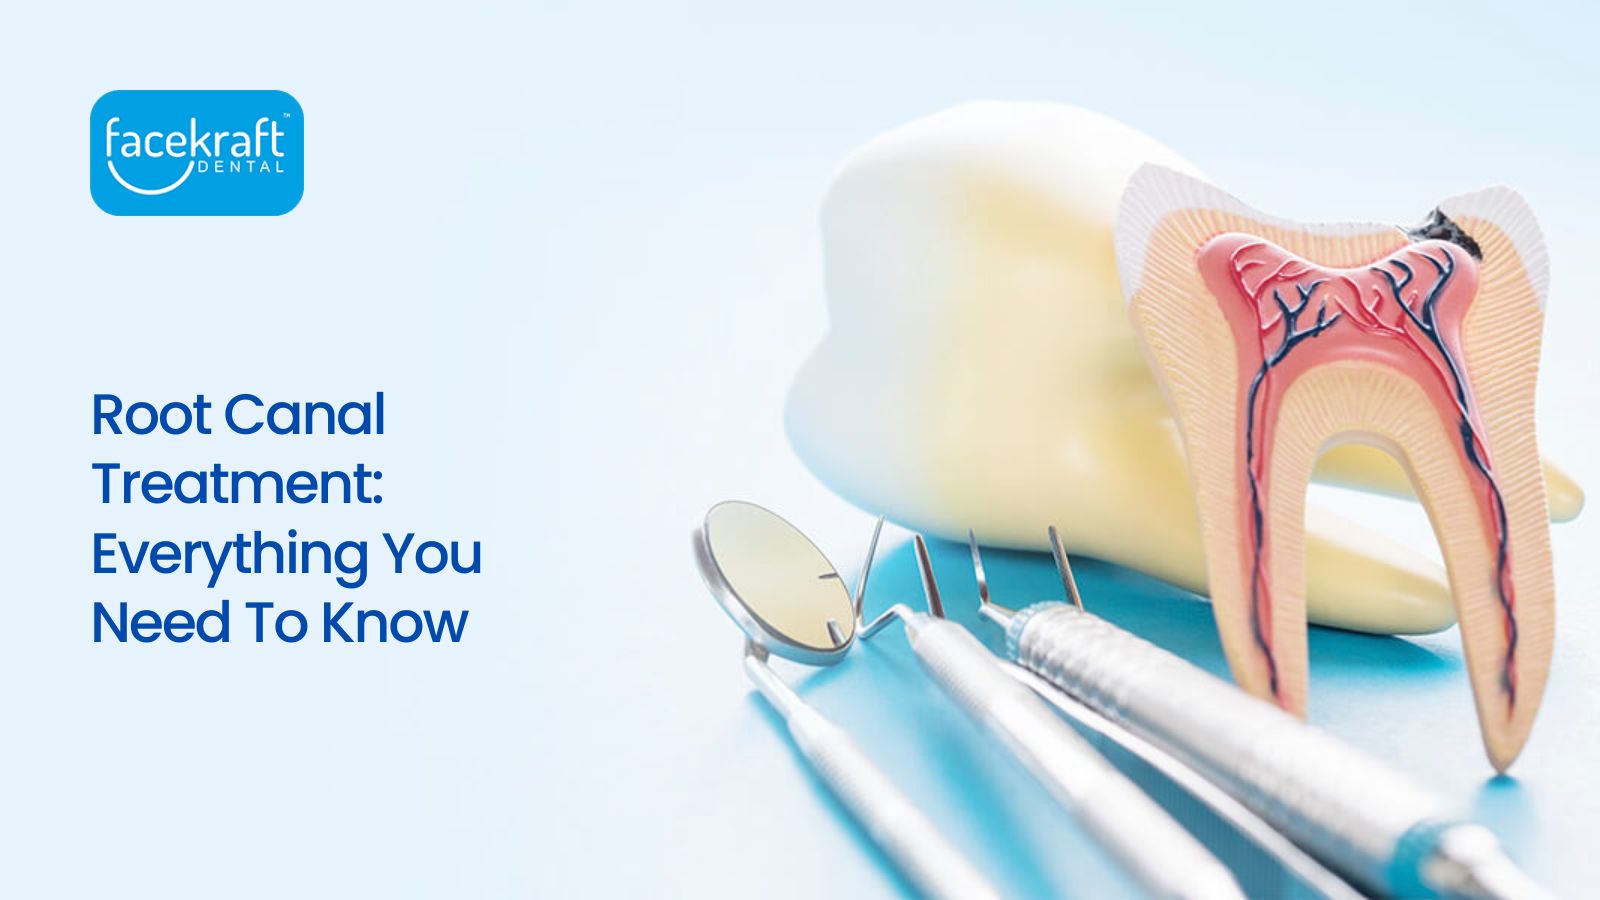 Everything You Need To Know about Root Canal Treatment.